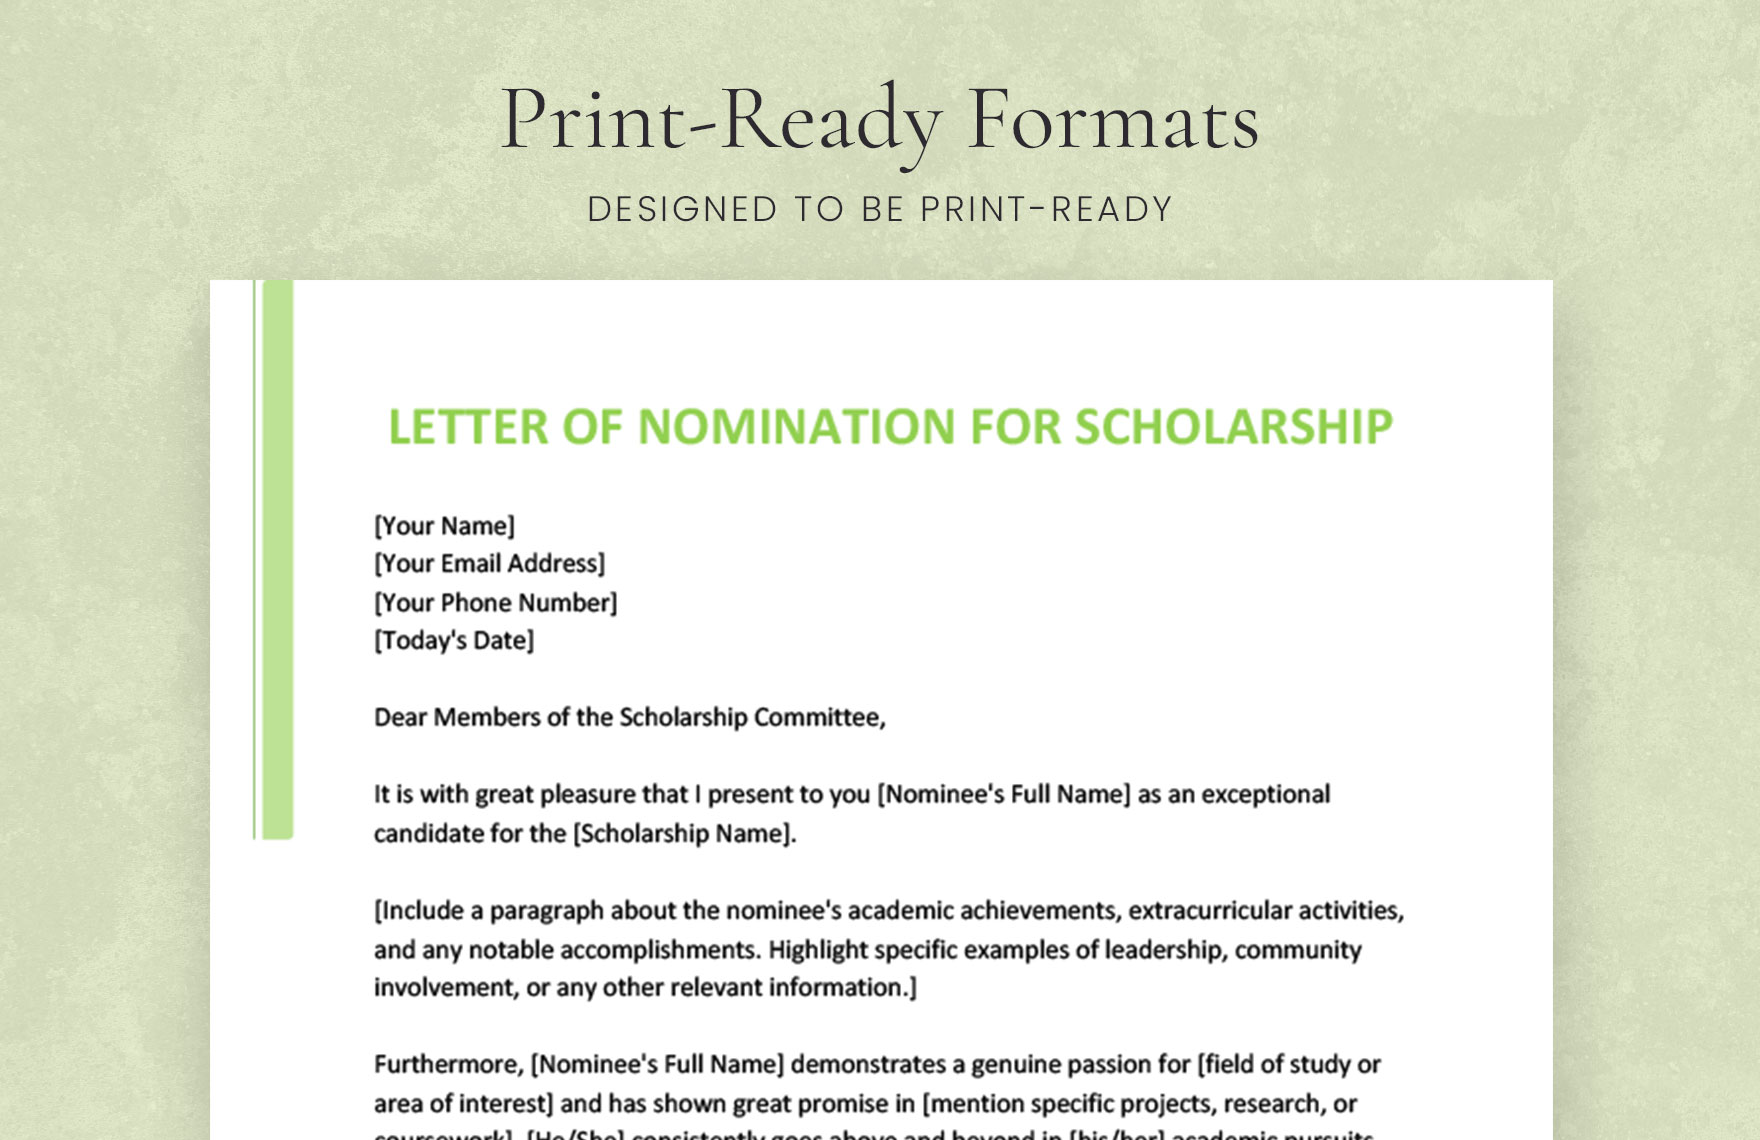 Letter of Nomination for Scholarship